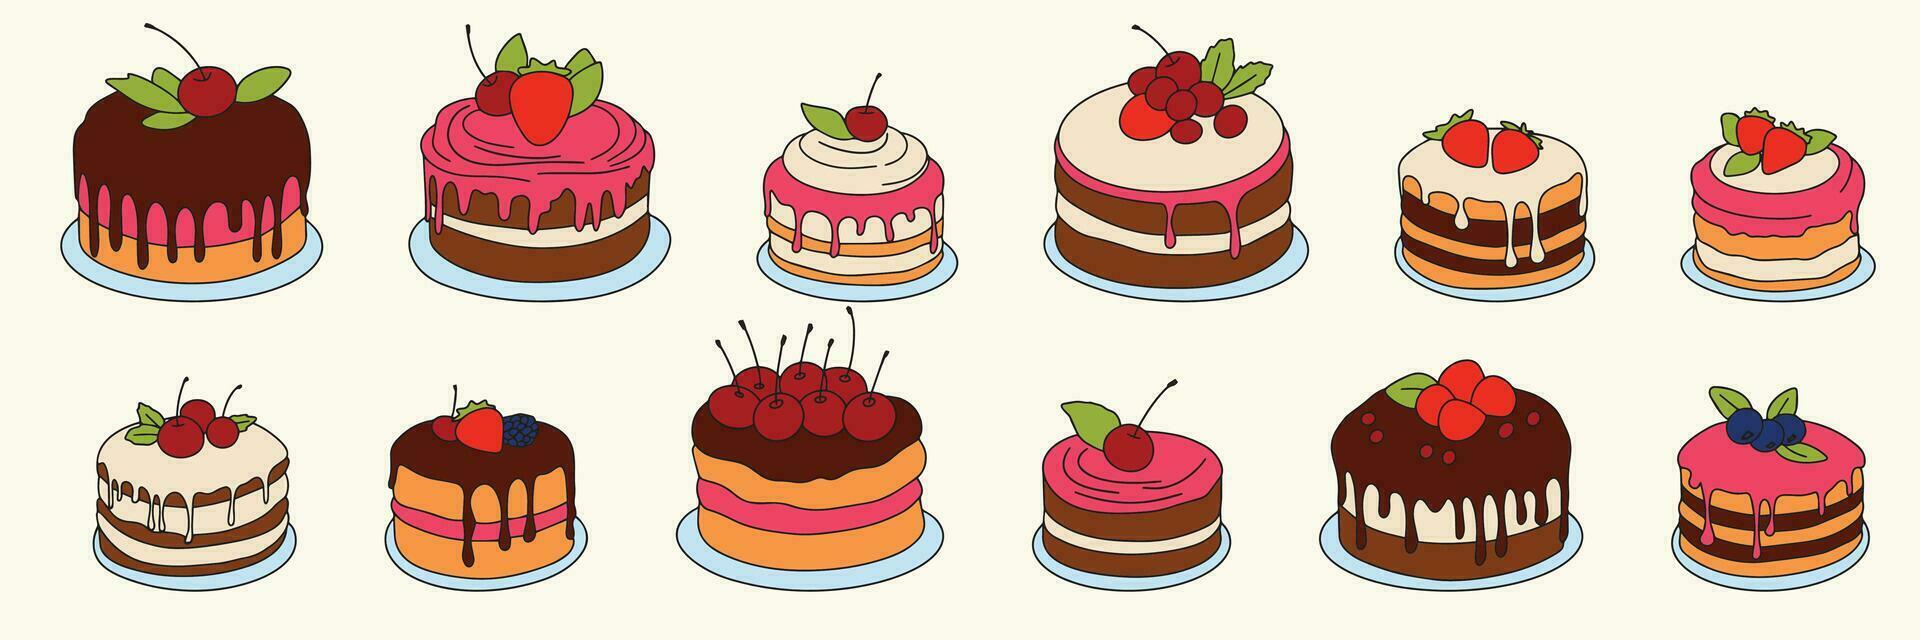 Big collection of cakes colored outline. Cake in doodle style isolated on white background. Hand drawn cake on plate. Vector illustration.